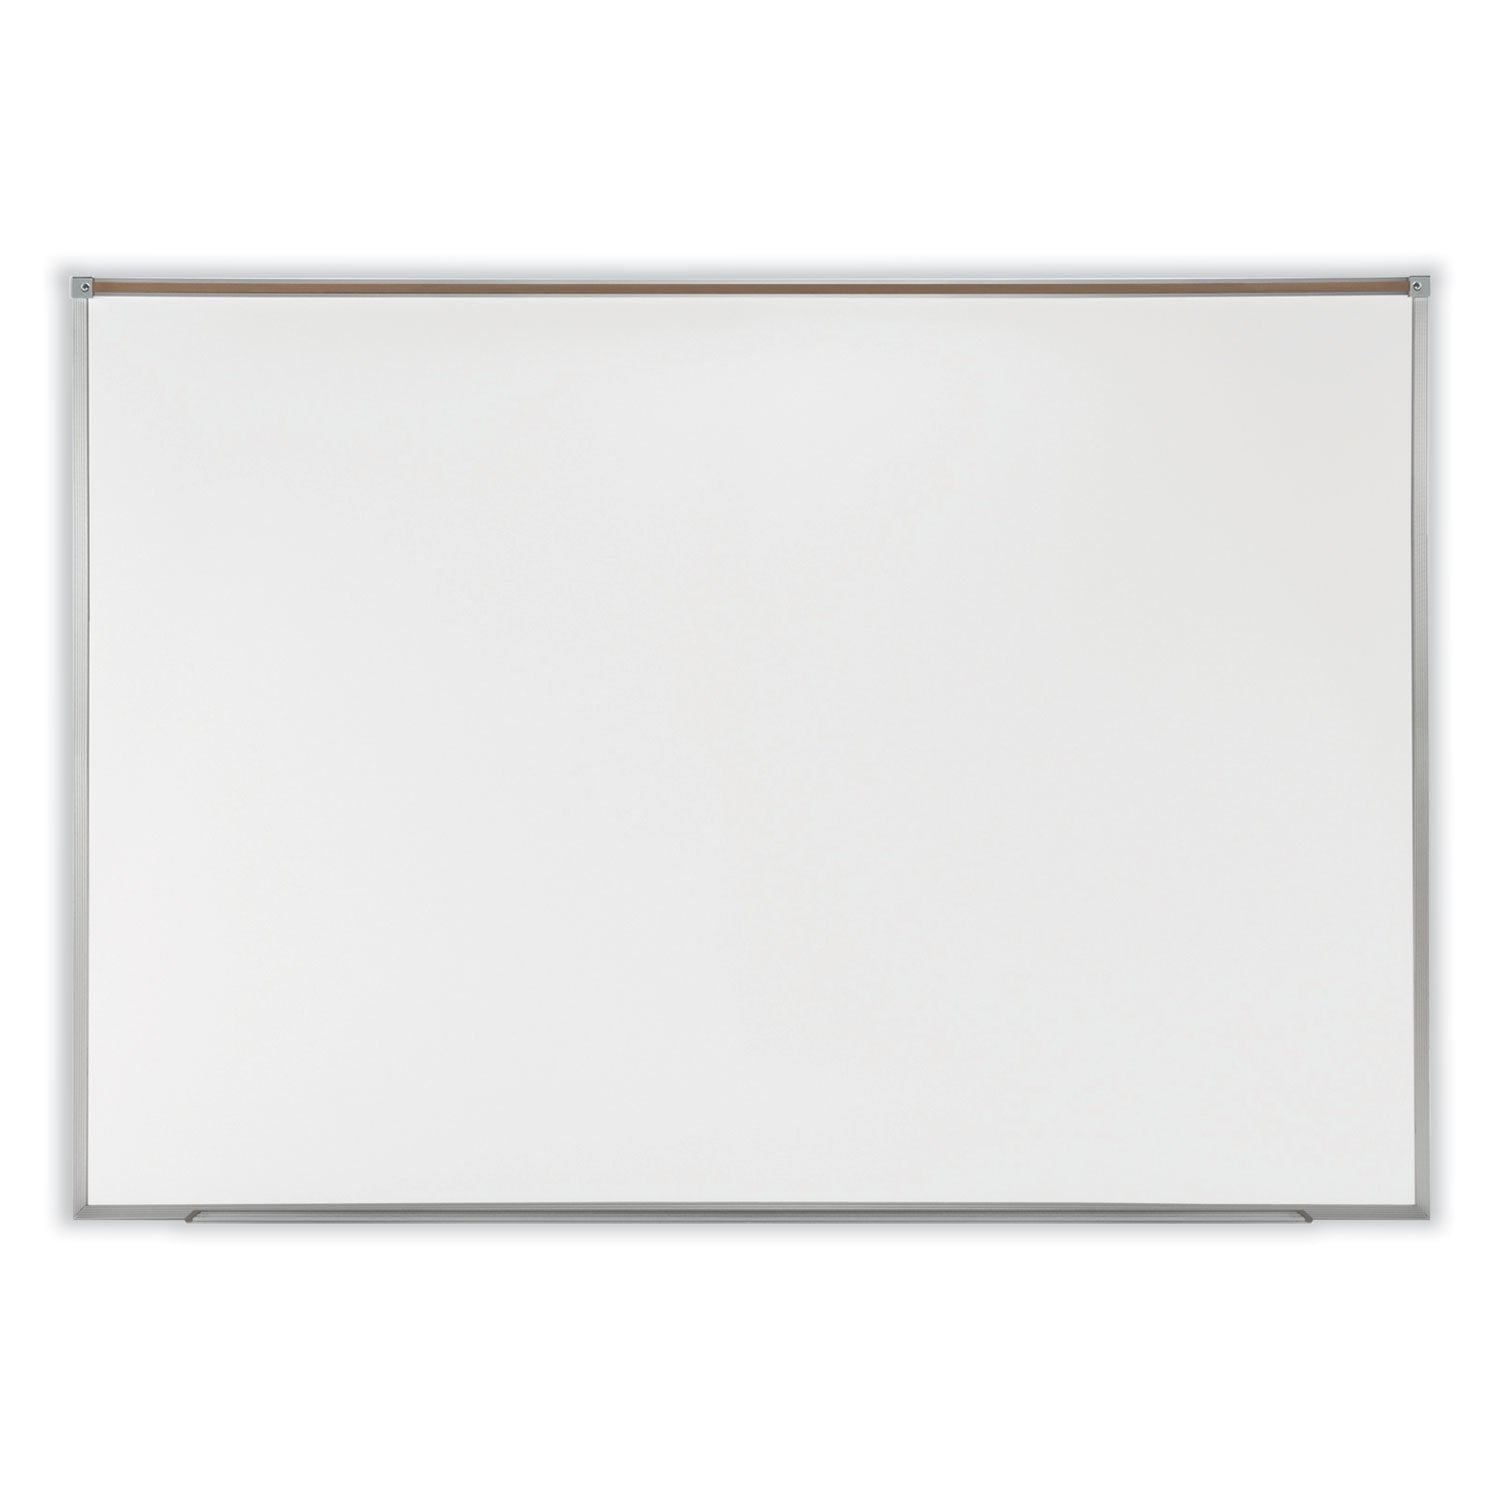 proma-magnetic-porcelain-projection-whiteboard-w-satin-aluminum-frame-485-x-365-white-surfaceships-in-7-10-business-days_gheprm1344 - 1